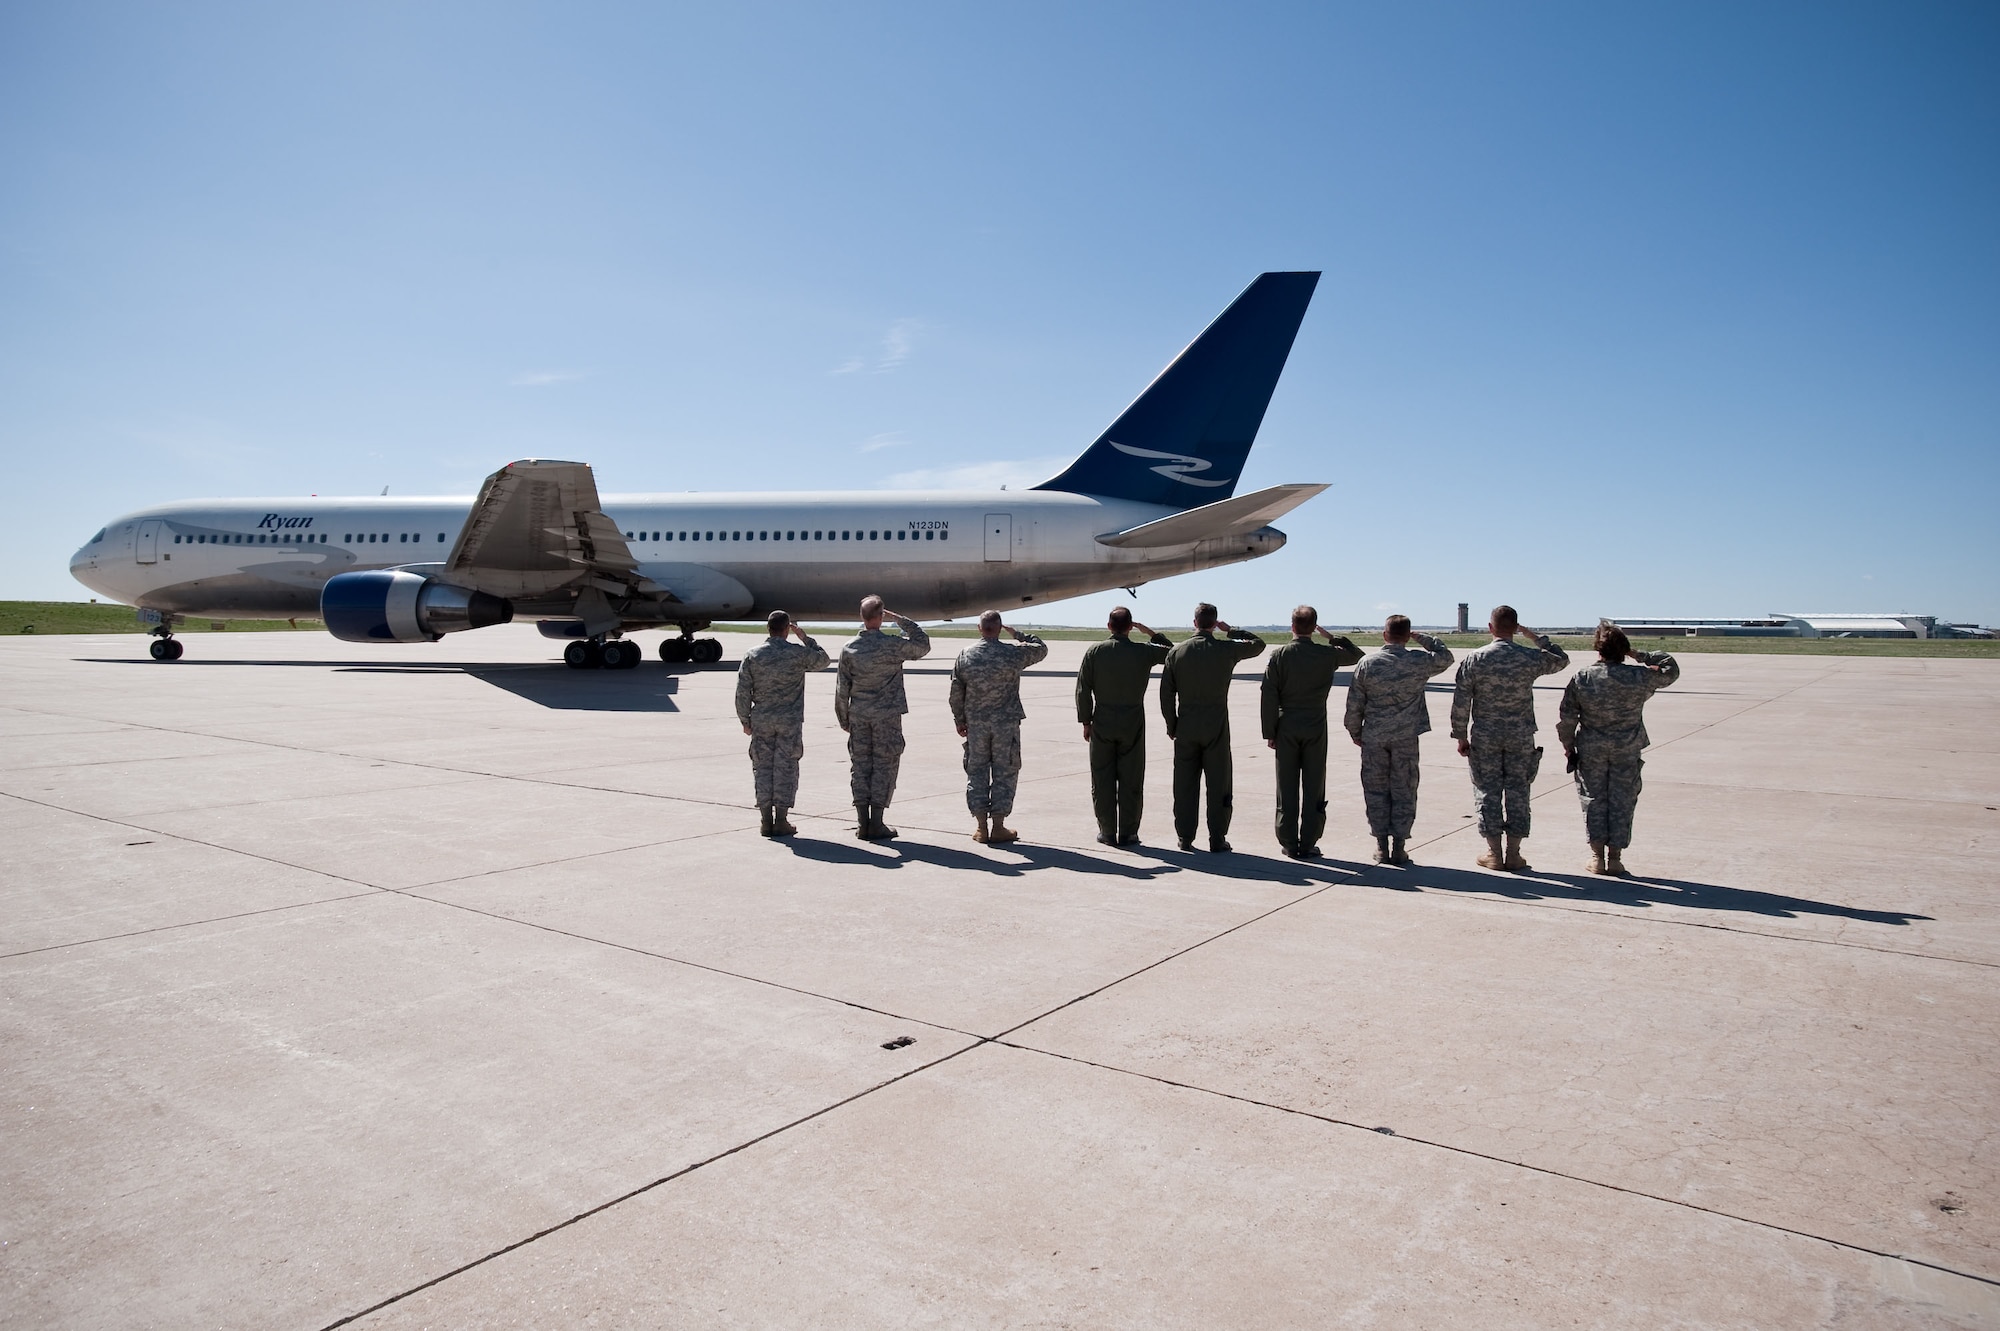 Commanders and senior staff of the Colorado National Guard Joint Force Headquarters and 140th Wing salute the departure of more than 200 Airmen deploying to Iraq in support of Operation Iraqi Freedom. (U.S. Air Force photo/Master Sgt. John Nimmo, Sr.) (RELEASED)